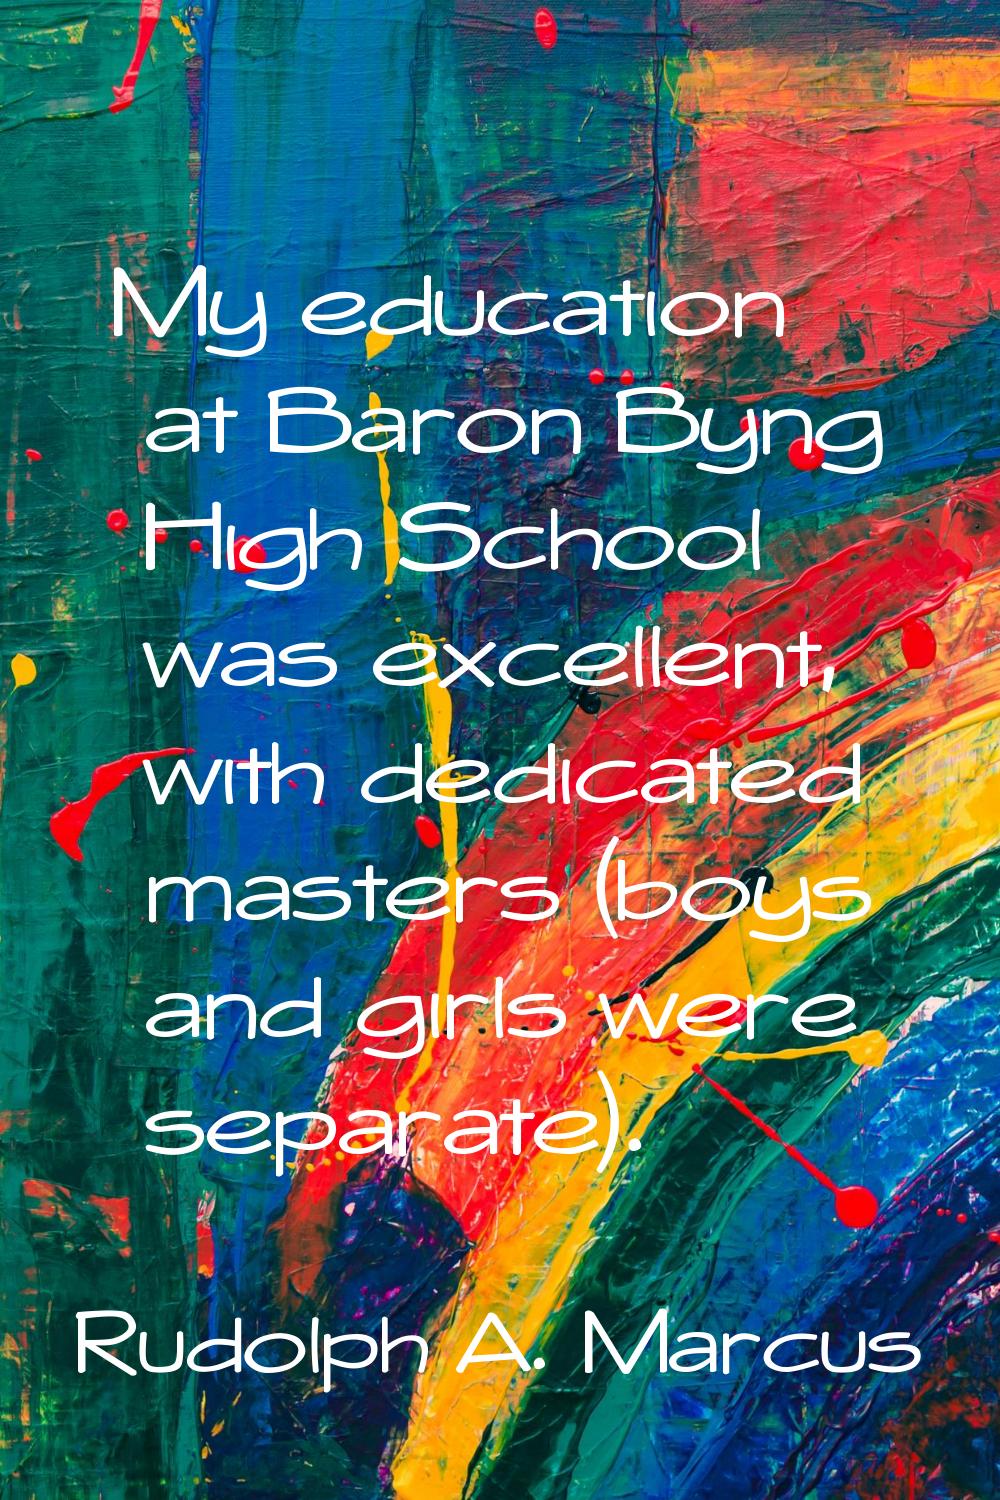 My education at Baron Byng High School was excellent, with dedicated masters (boys and girls were s